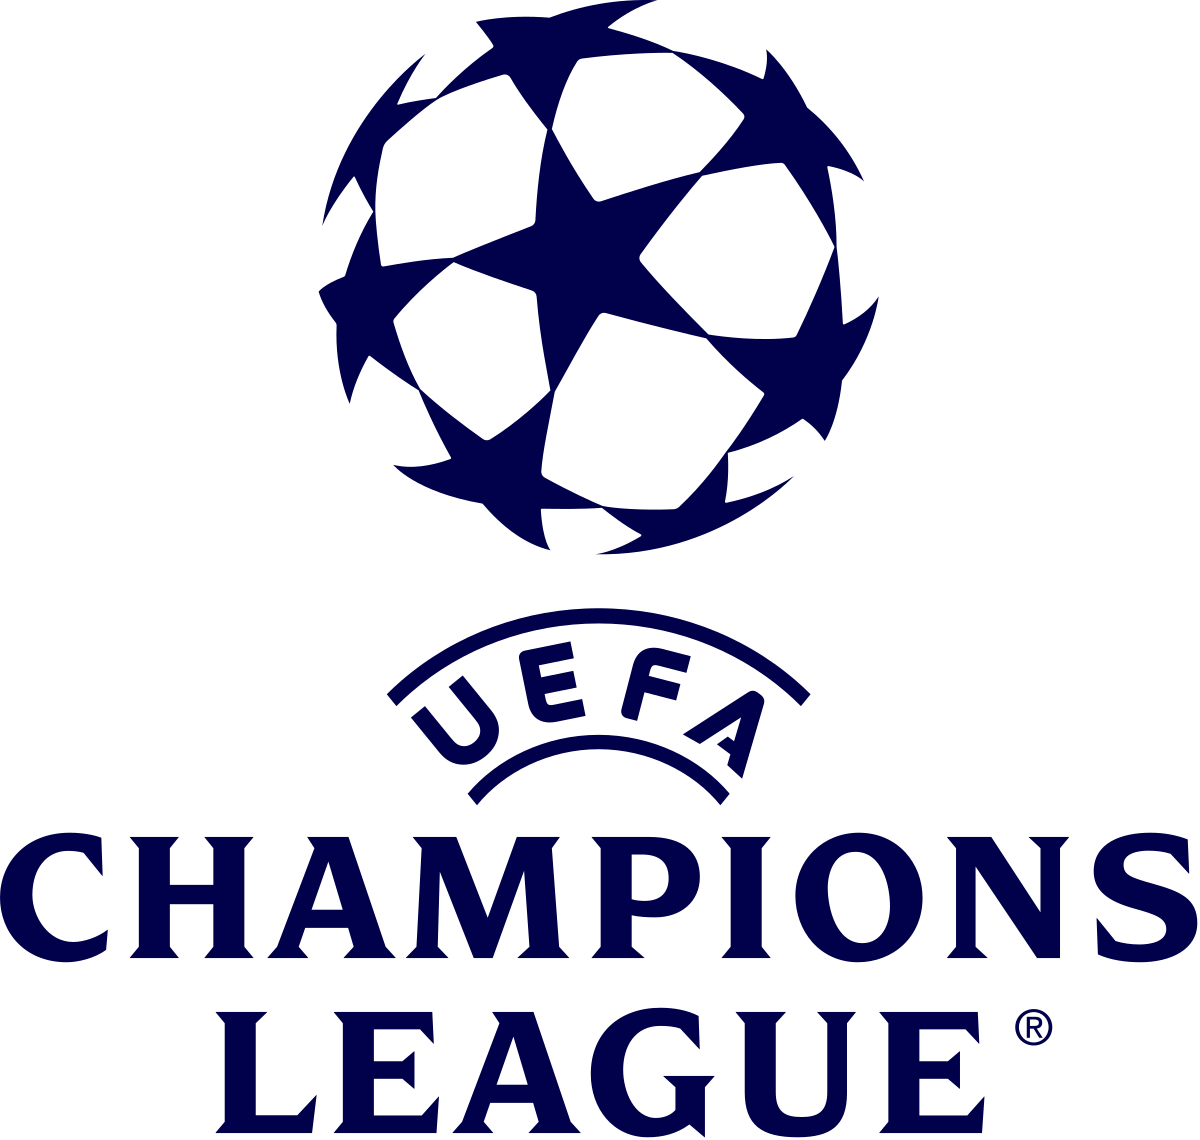 UCL; AC MILAN TAKES ON NEW CASTLE UNITED, PSG WELCOMES DORTMUND HOME, MAN CITY BEGINS TITLE DEFENDS AGAINST RED STAR BELGRADE.